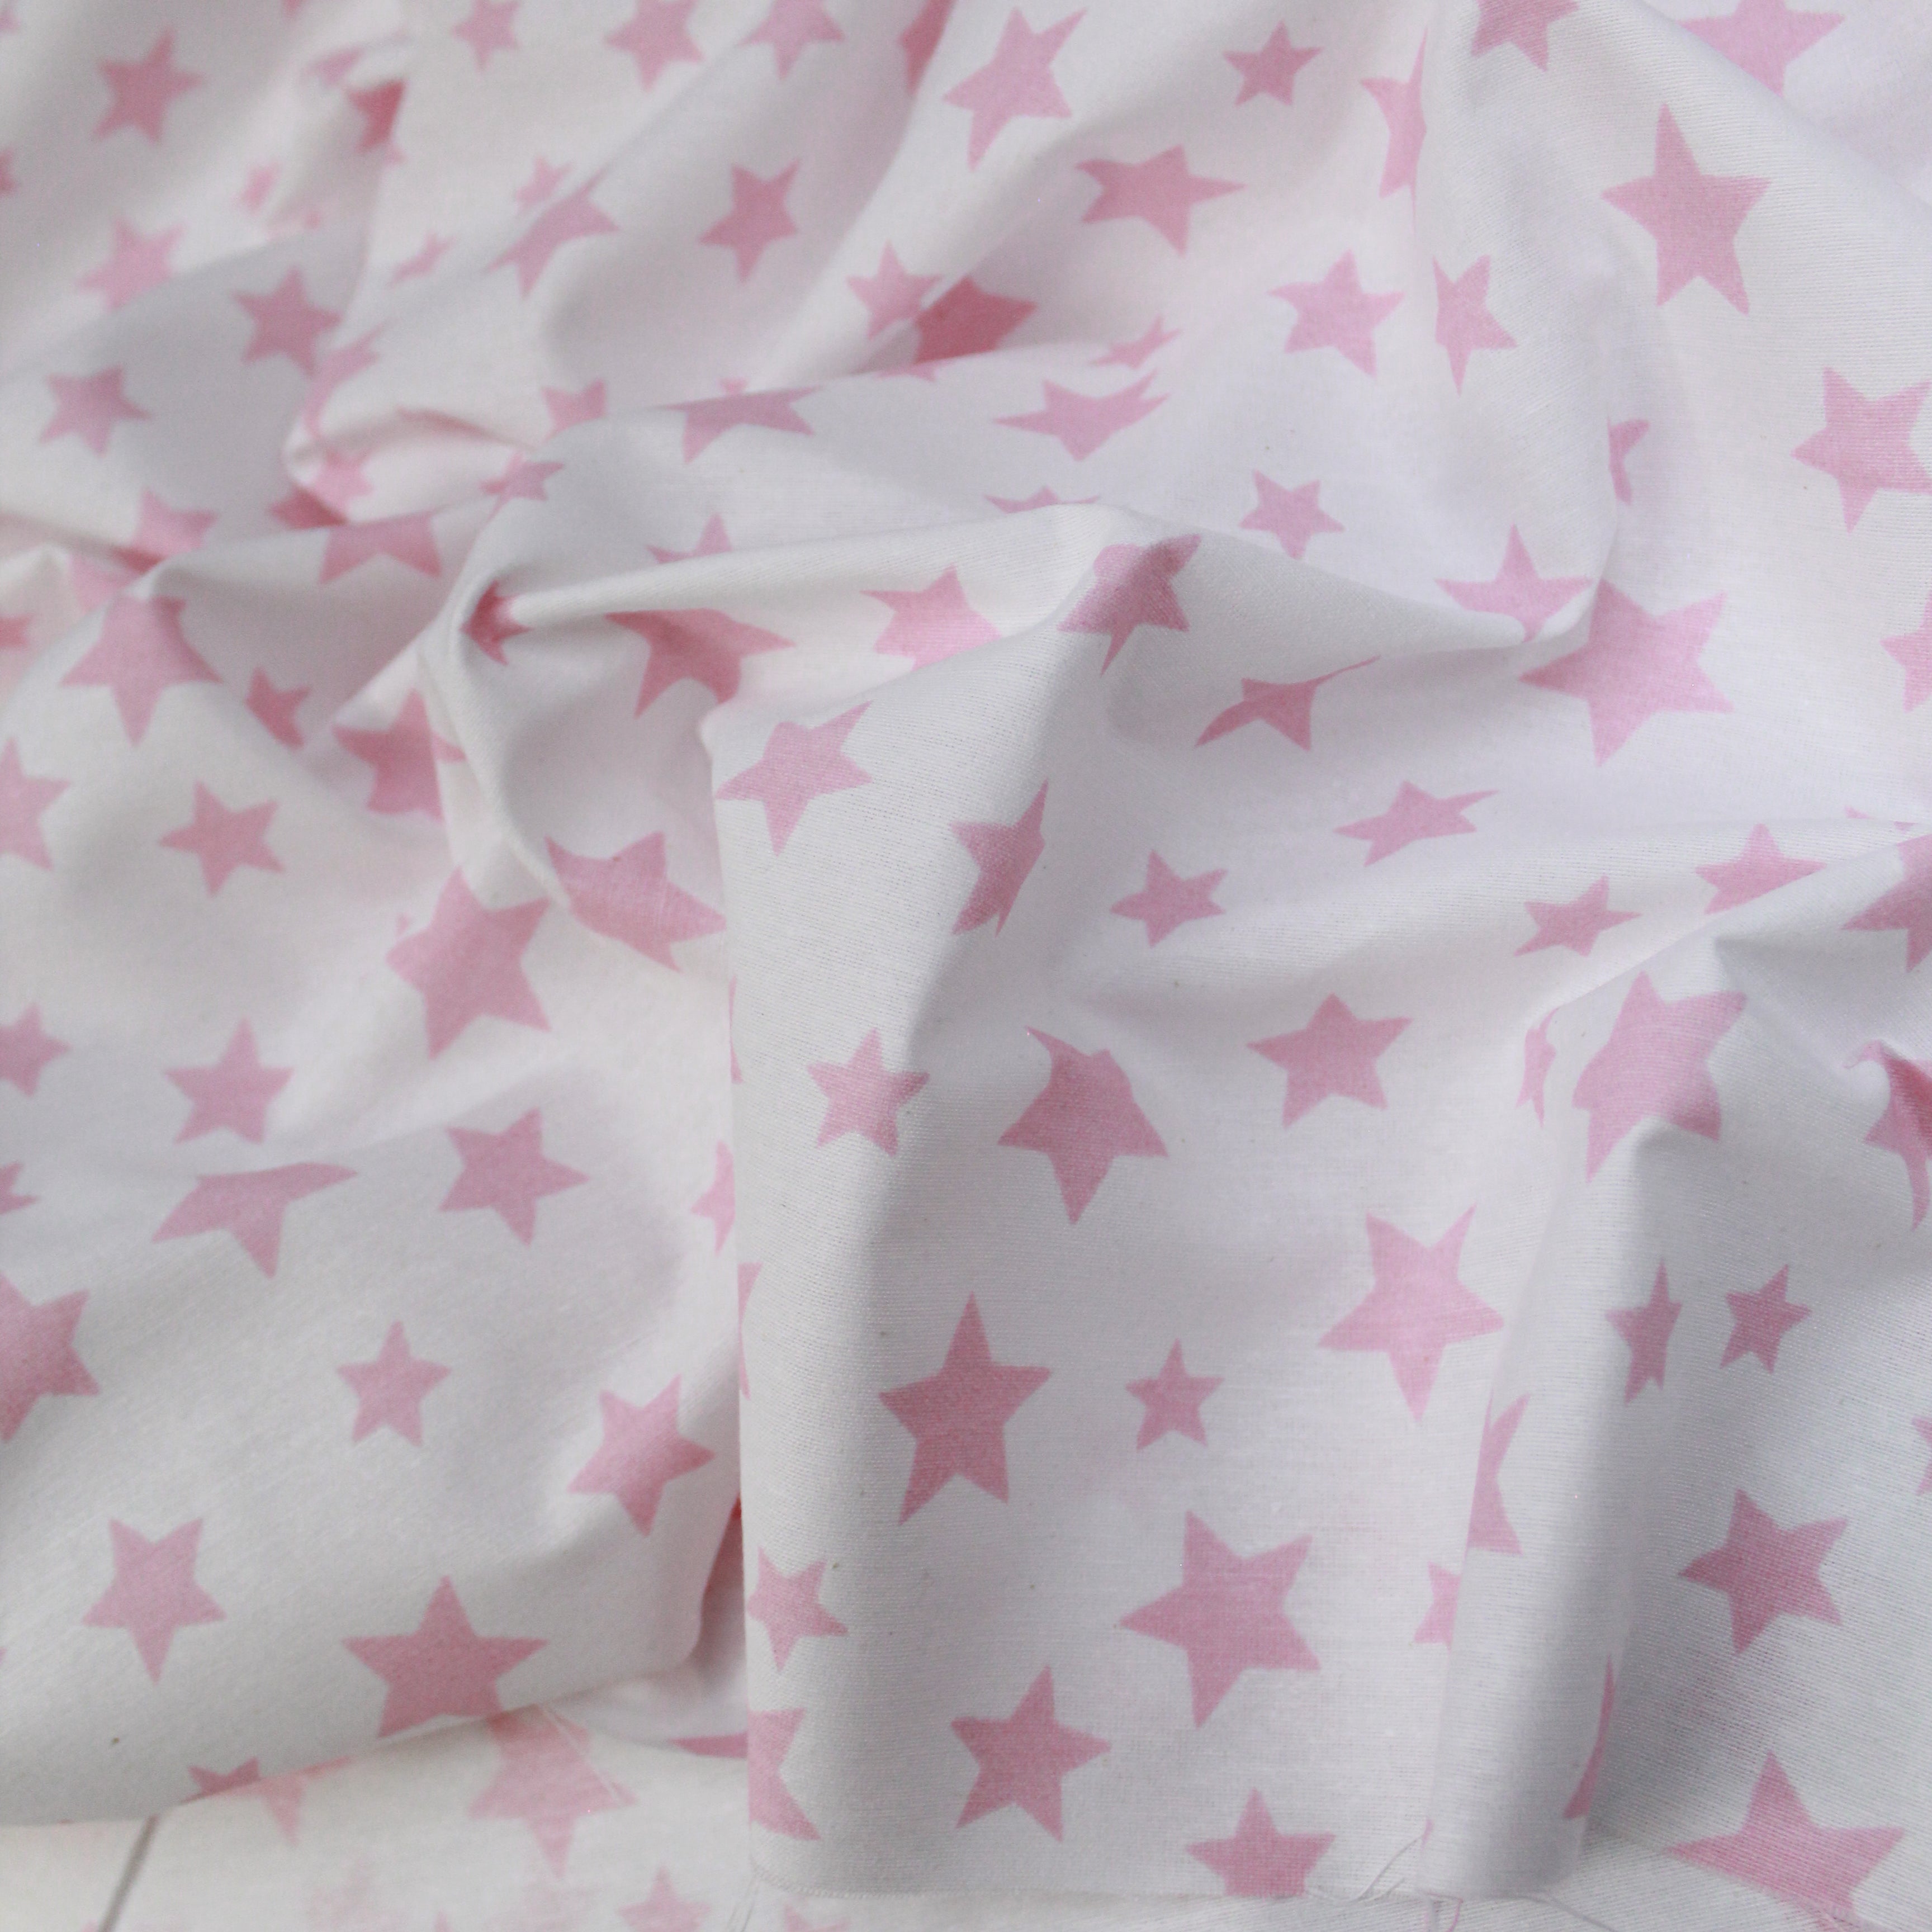 Premium Quality Super Wide Cotton Blend Sheeting "Pink Stars" 94" Wide White